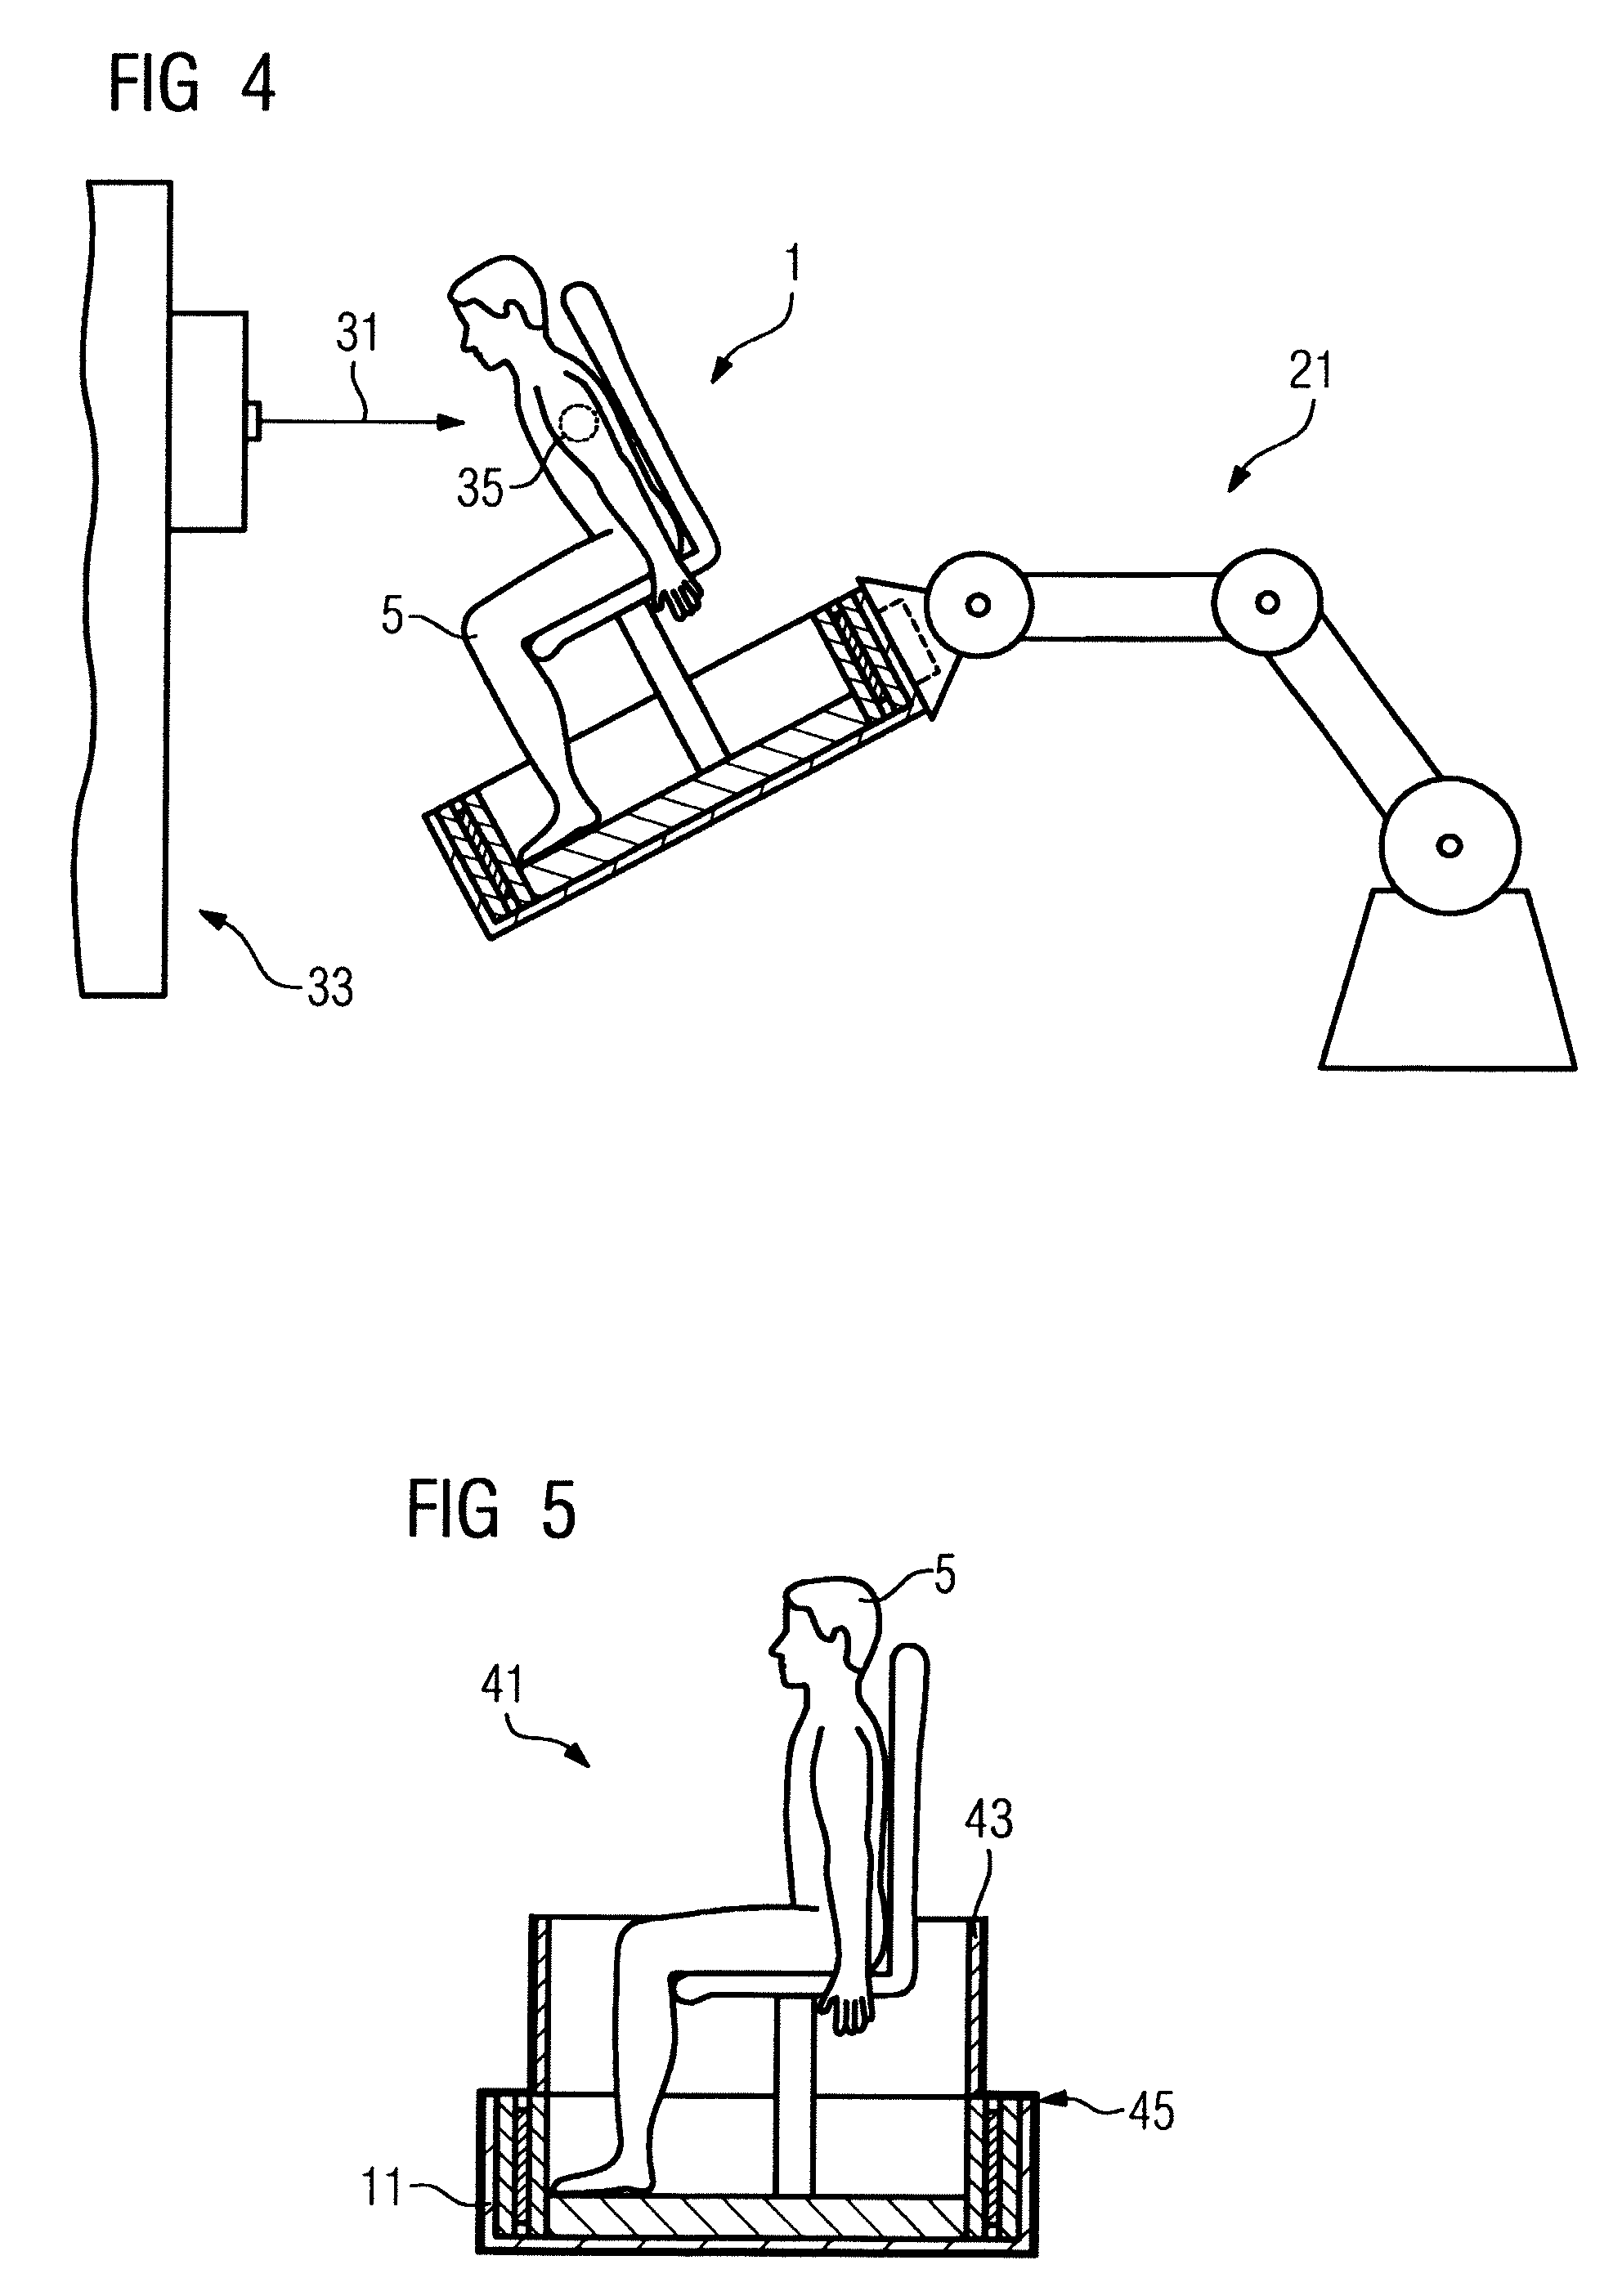 Patient positioning device